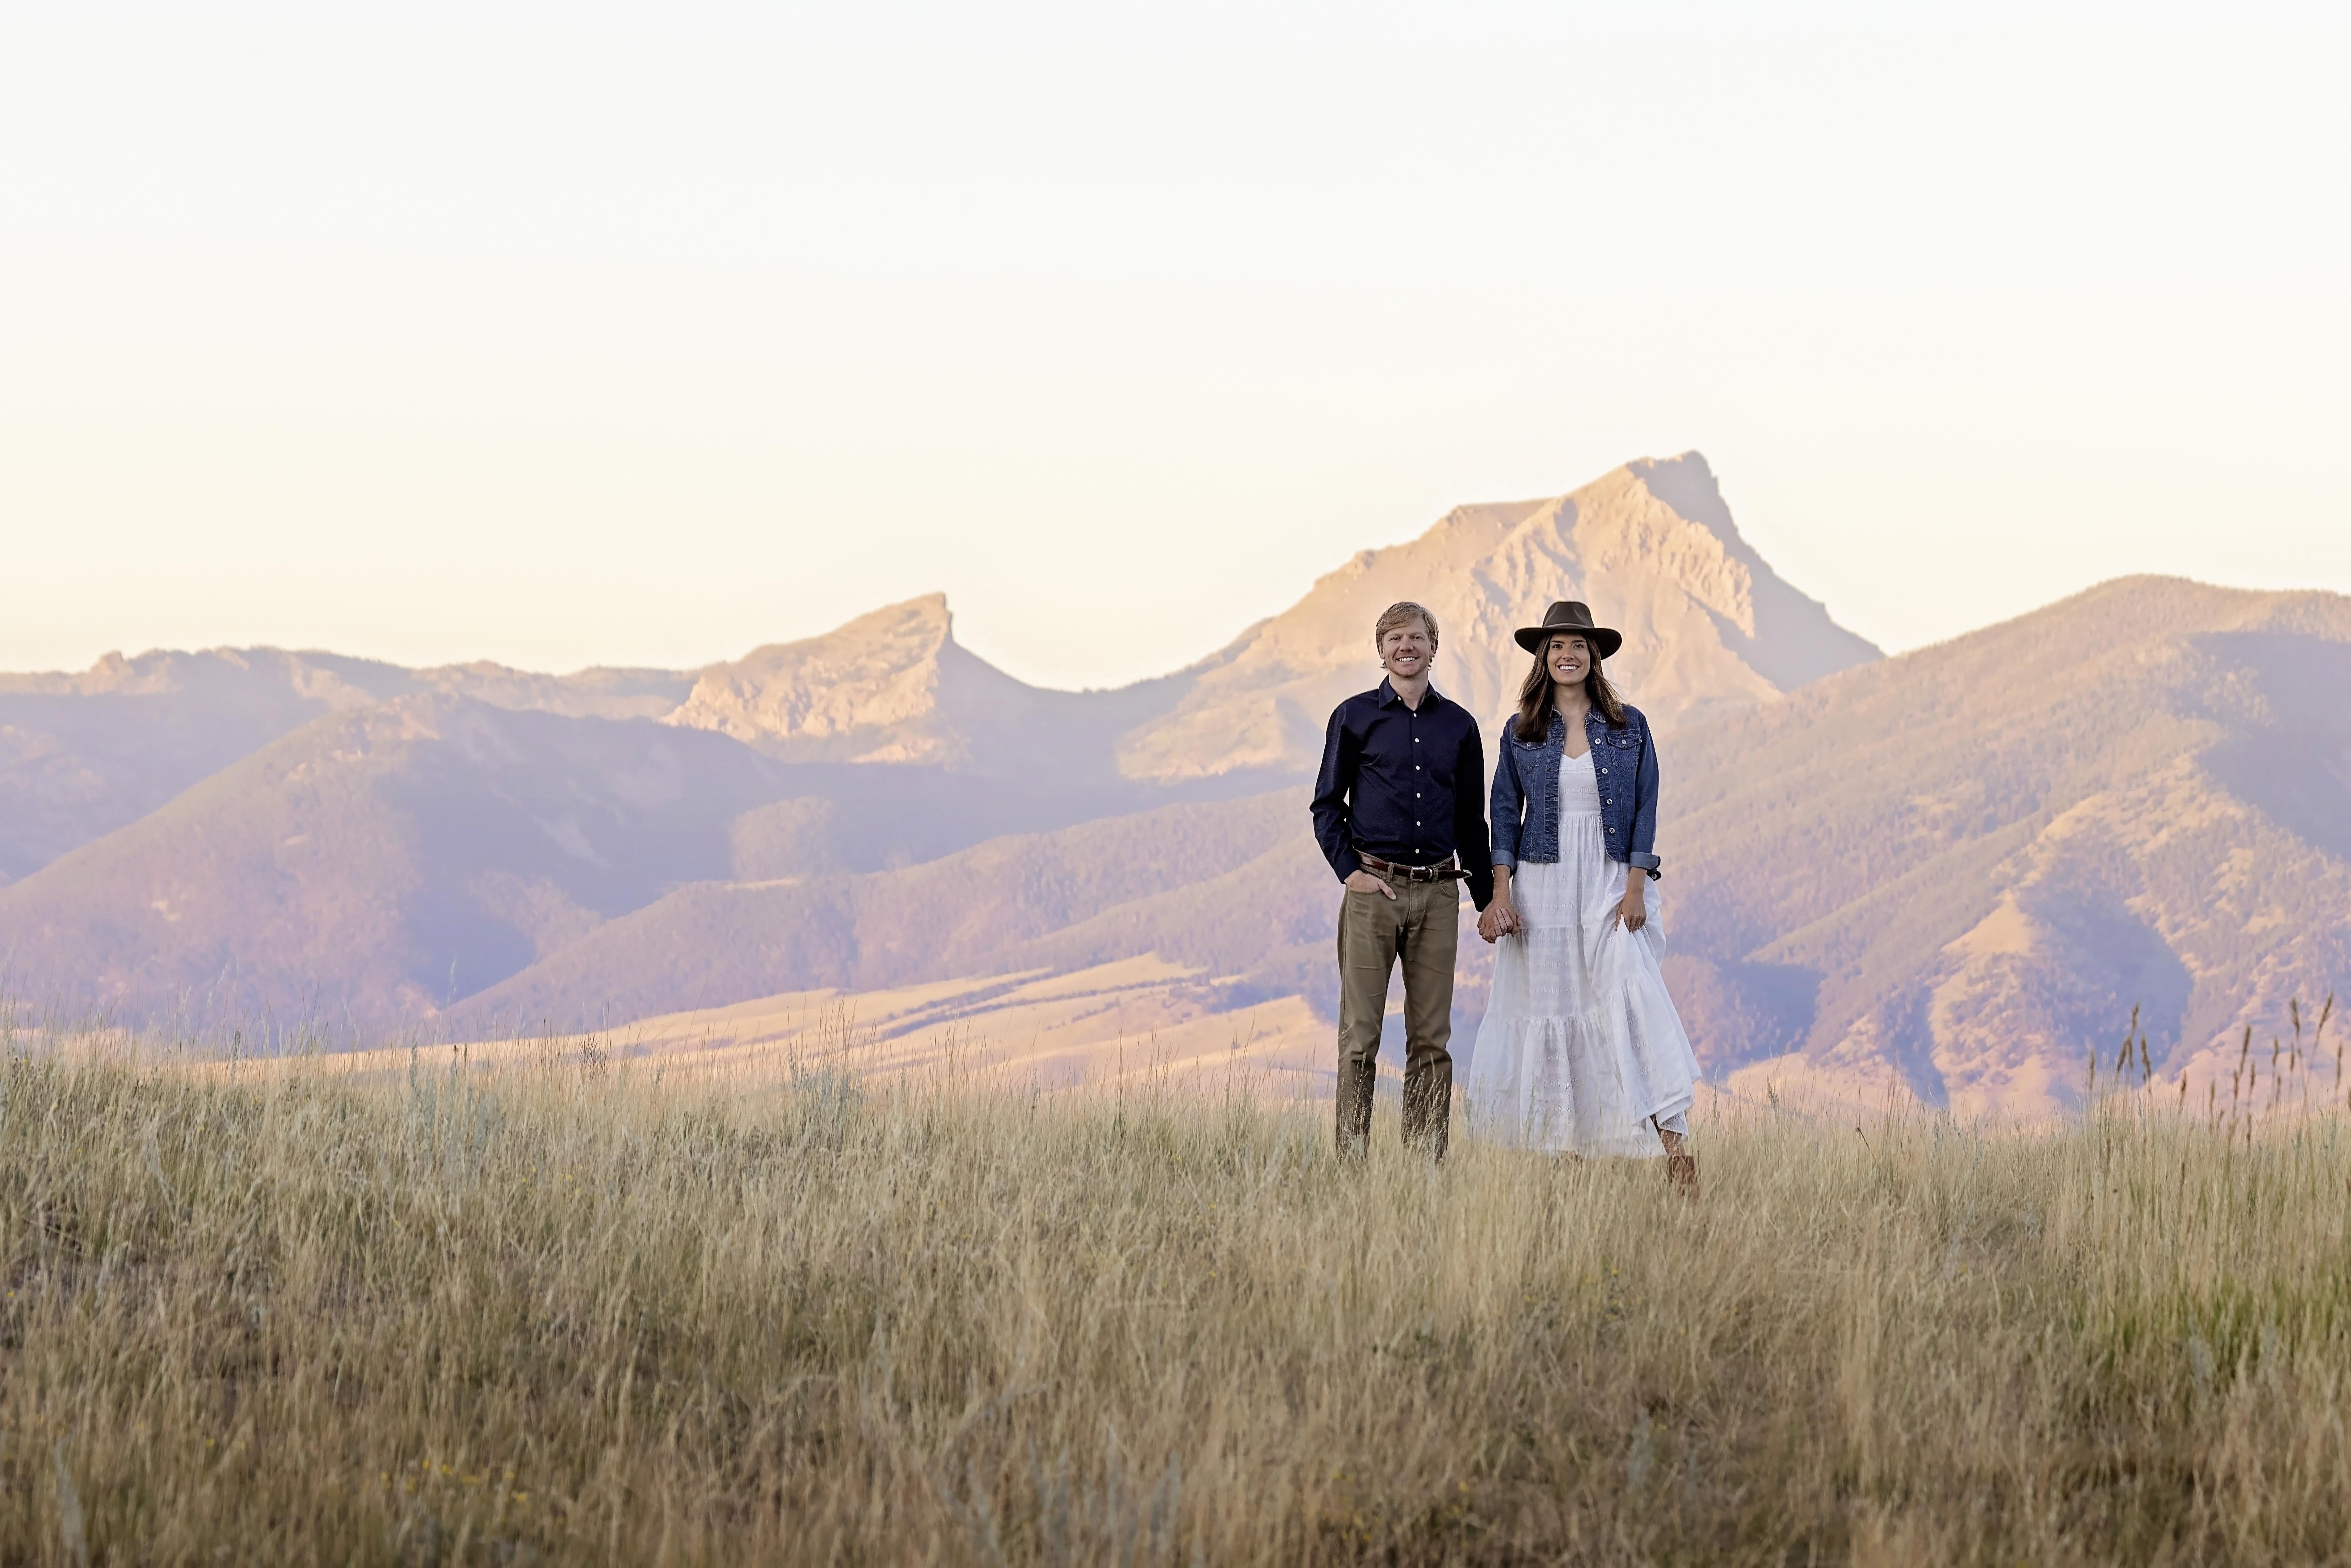 The Wedding Website of Griffin Cox and Lynn Kowsz